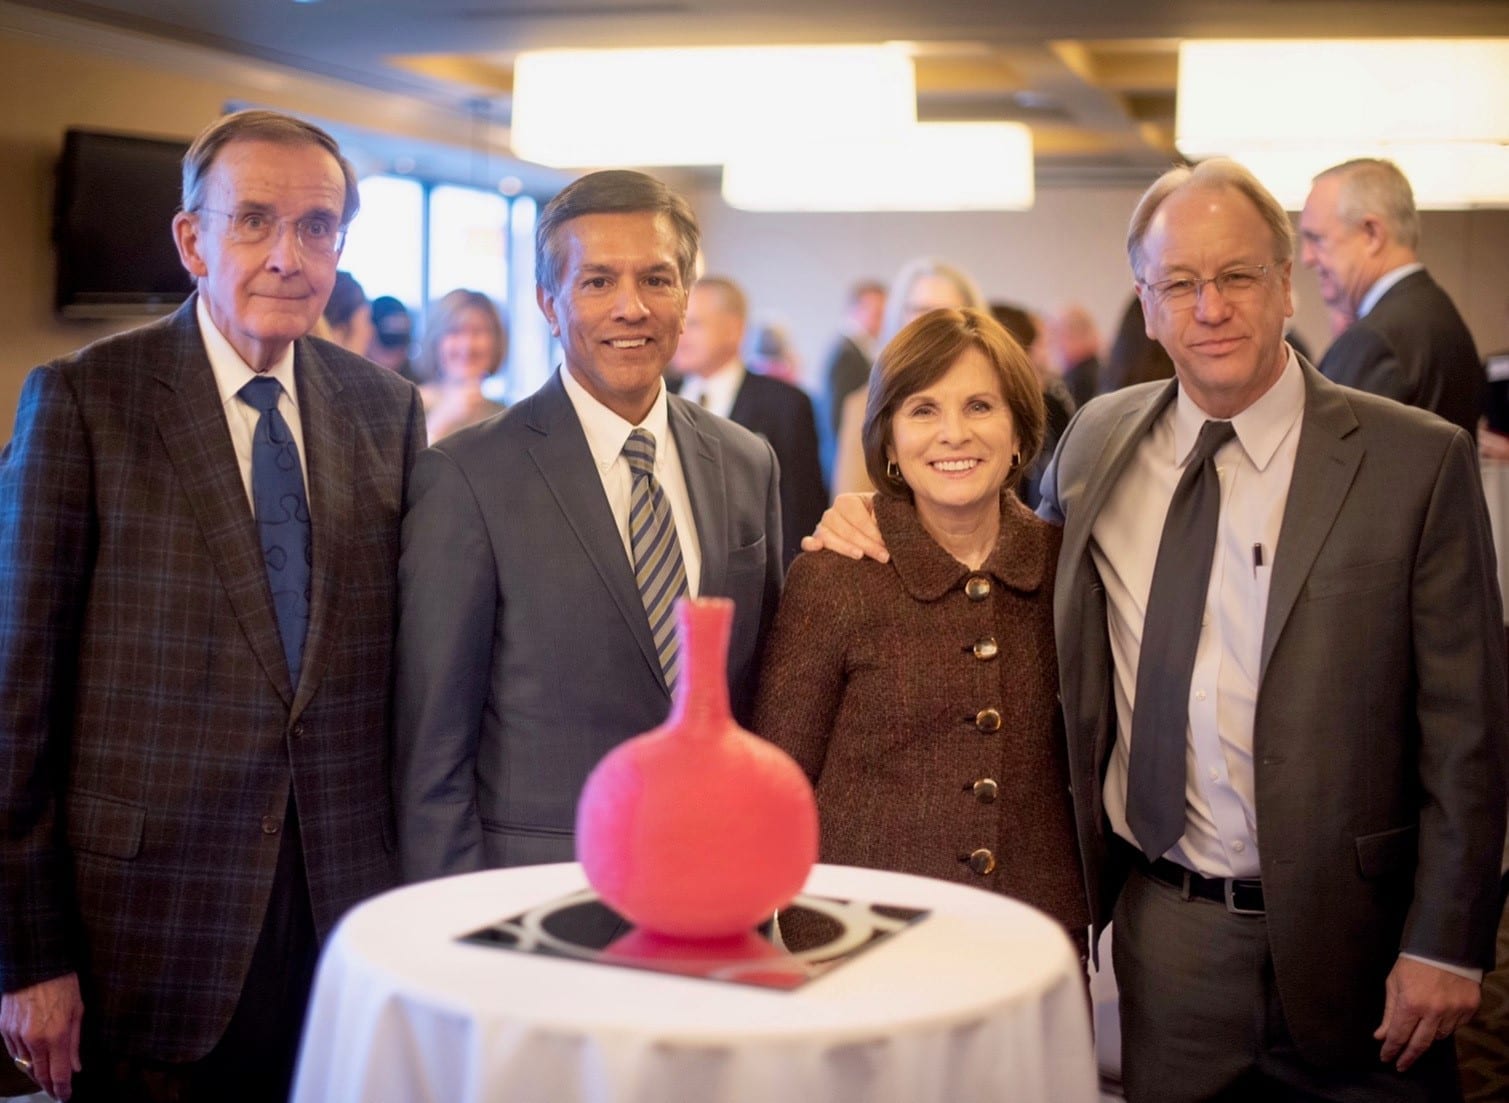 Moira Carlsted stands with the John L. Krauss award--a handmade glass sculpture from local artist Ben Johnson--at the O'Neill School's Champions of Public Policy event. Carlstedt is pictured below (L-R) with John Krauss, PPI director Thomas Guevara, and Brain Payne, President and CEO of the Central Indiana Community Foundation.